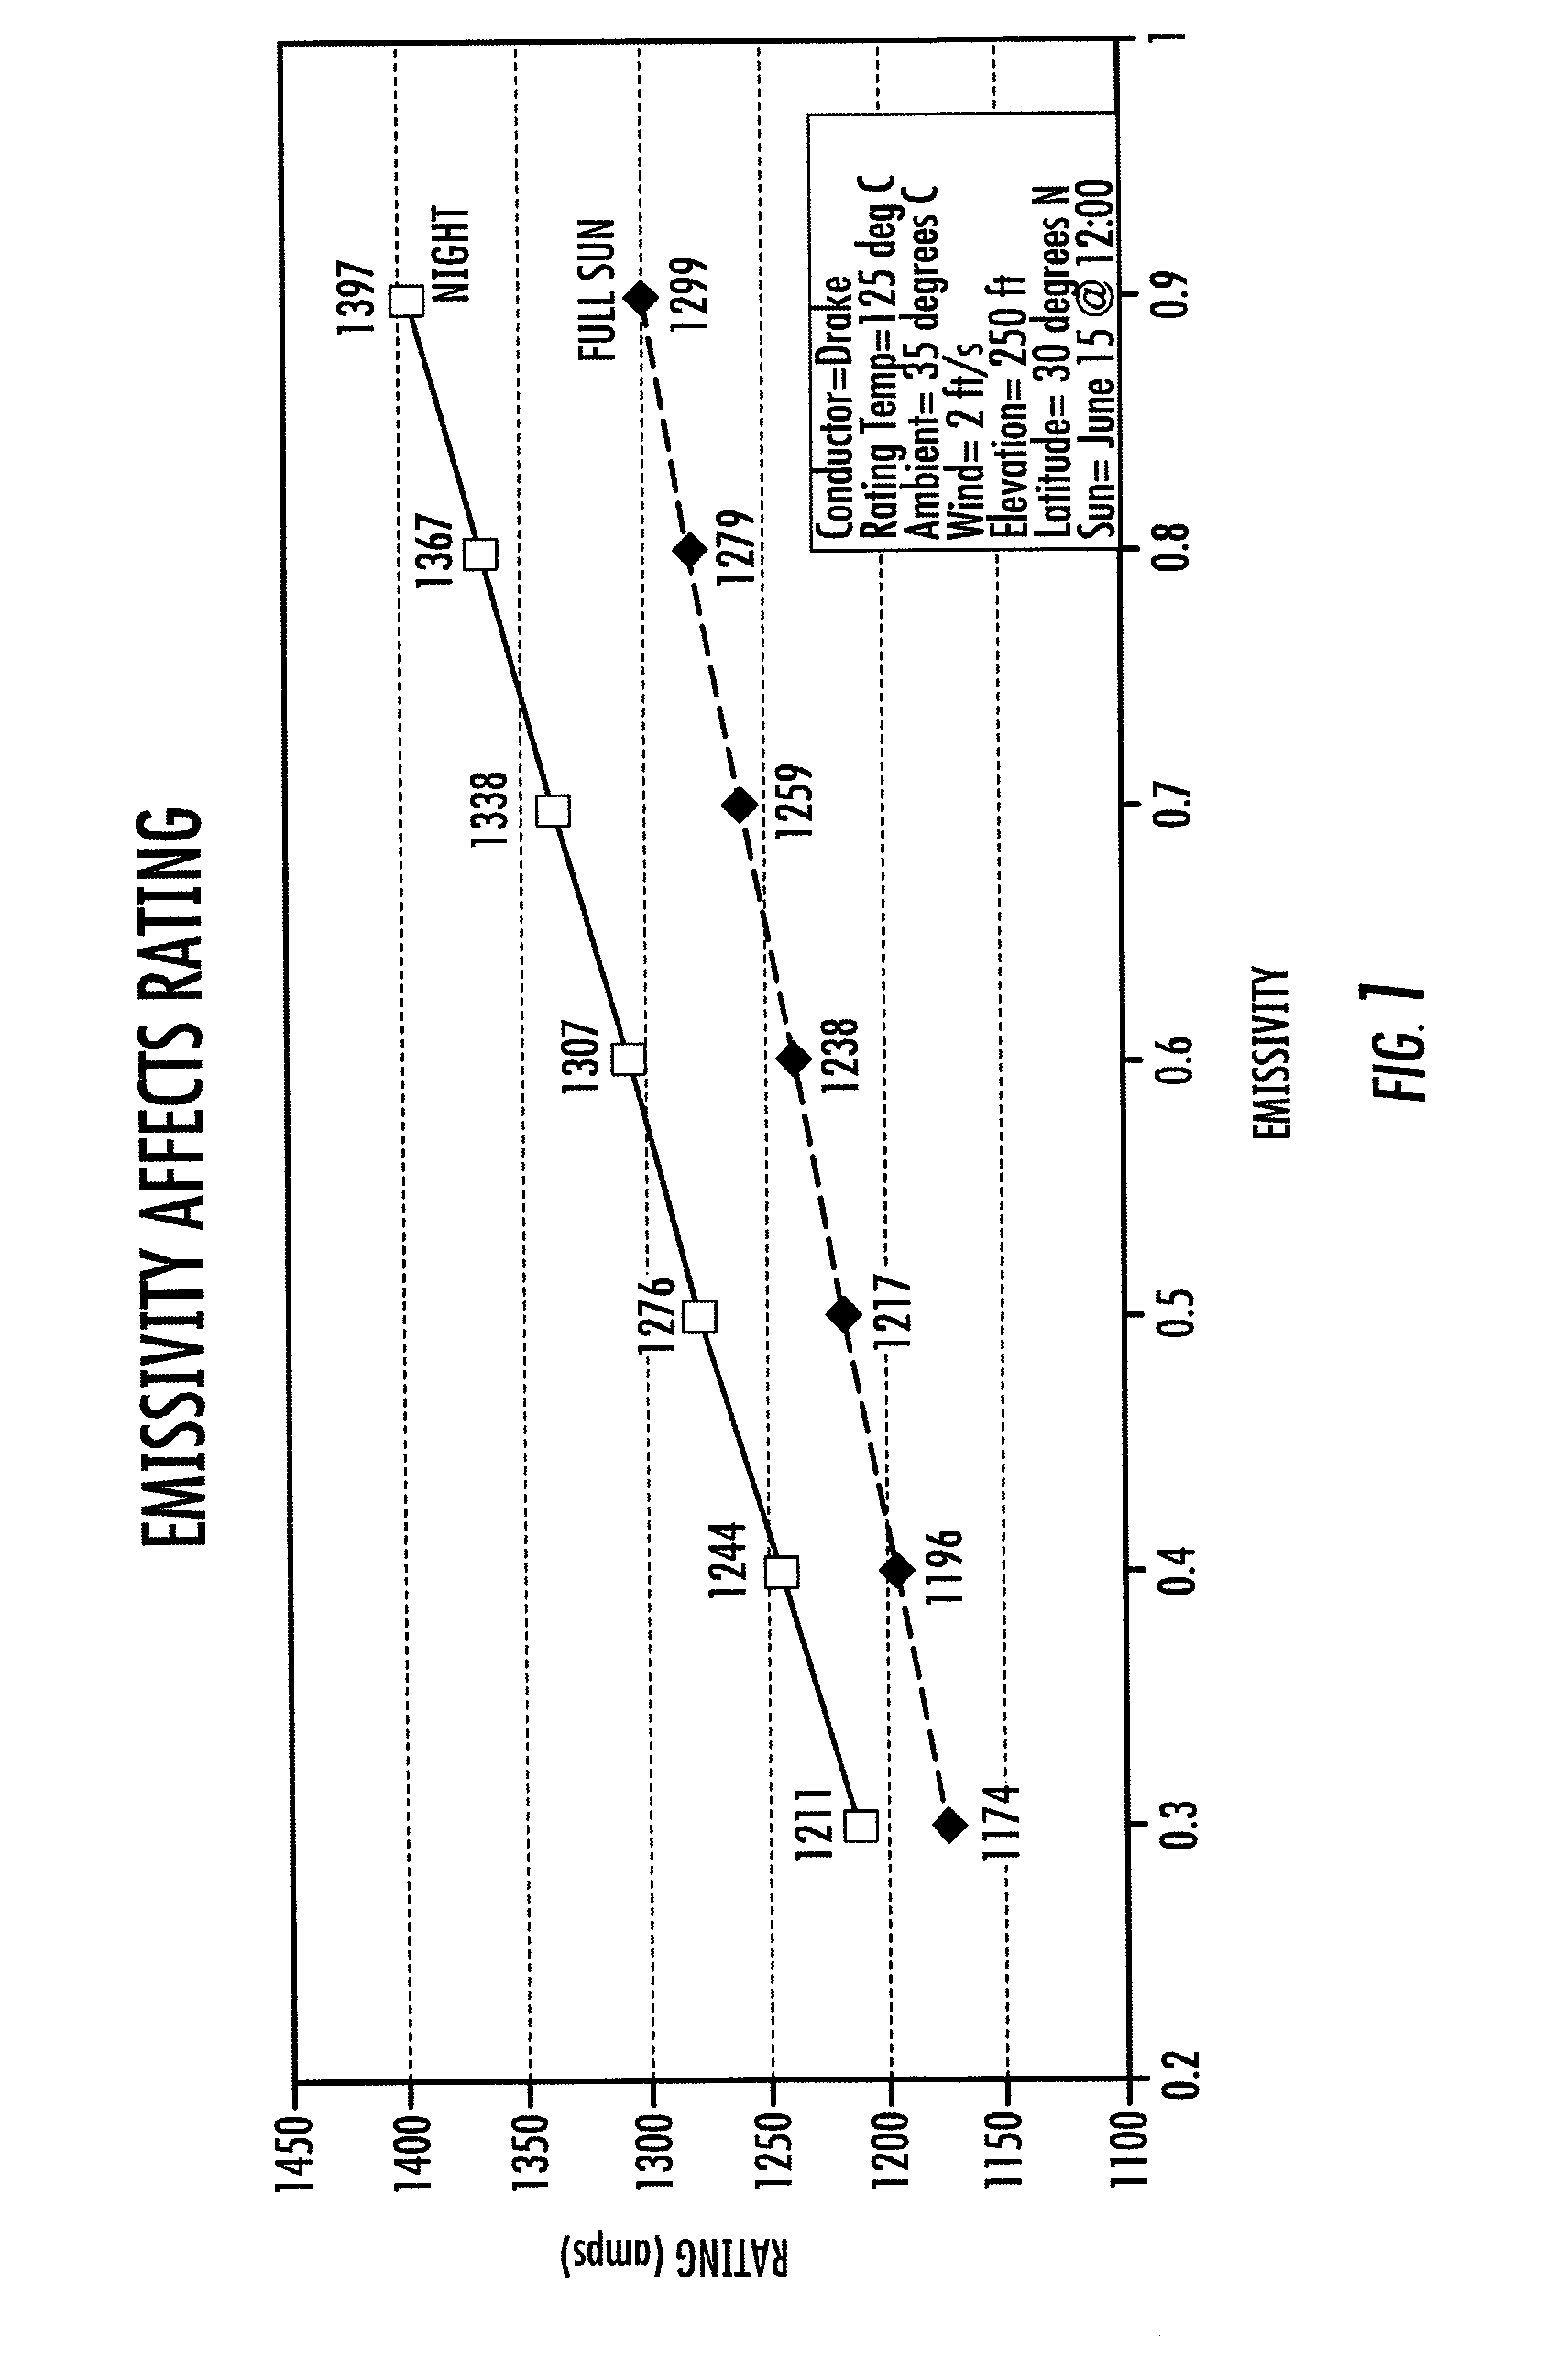 Emmissivity test instrument for overhead electrical transmission and distribution